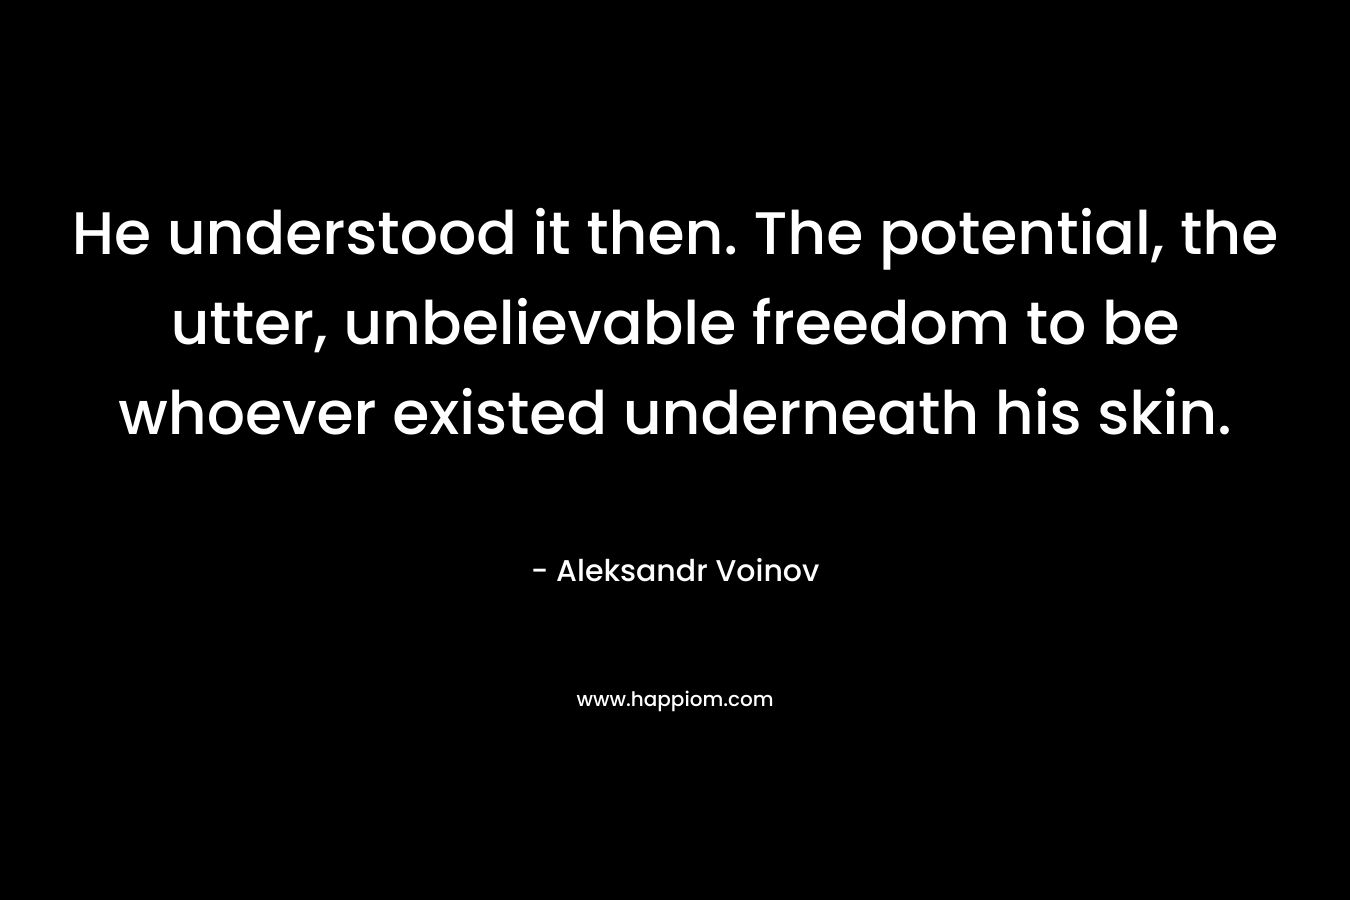 He understood it then. The potential, the utter, unbelievable freedom to be whoever existed underneath his skin. – Aleksandr Voinov